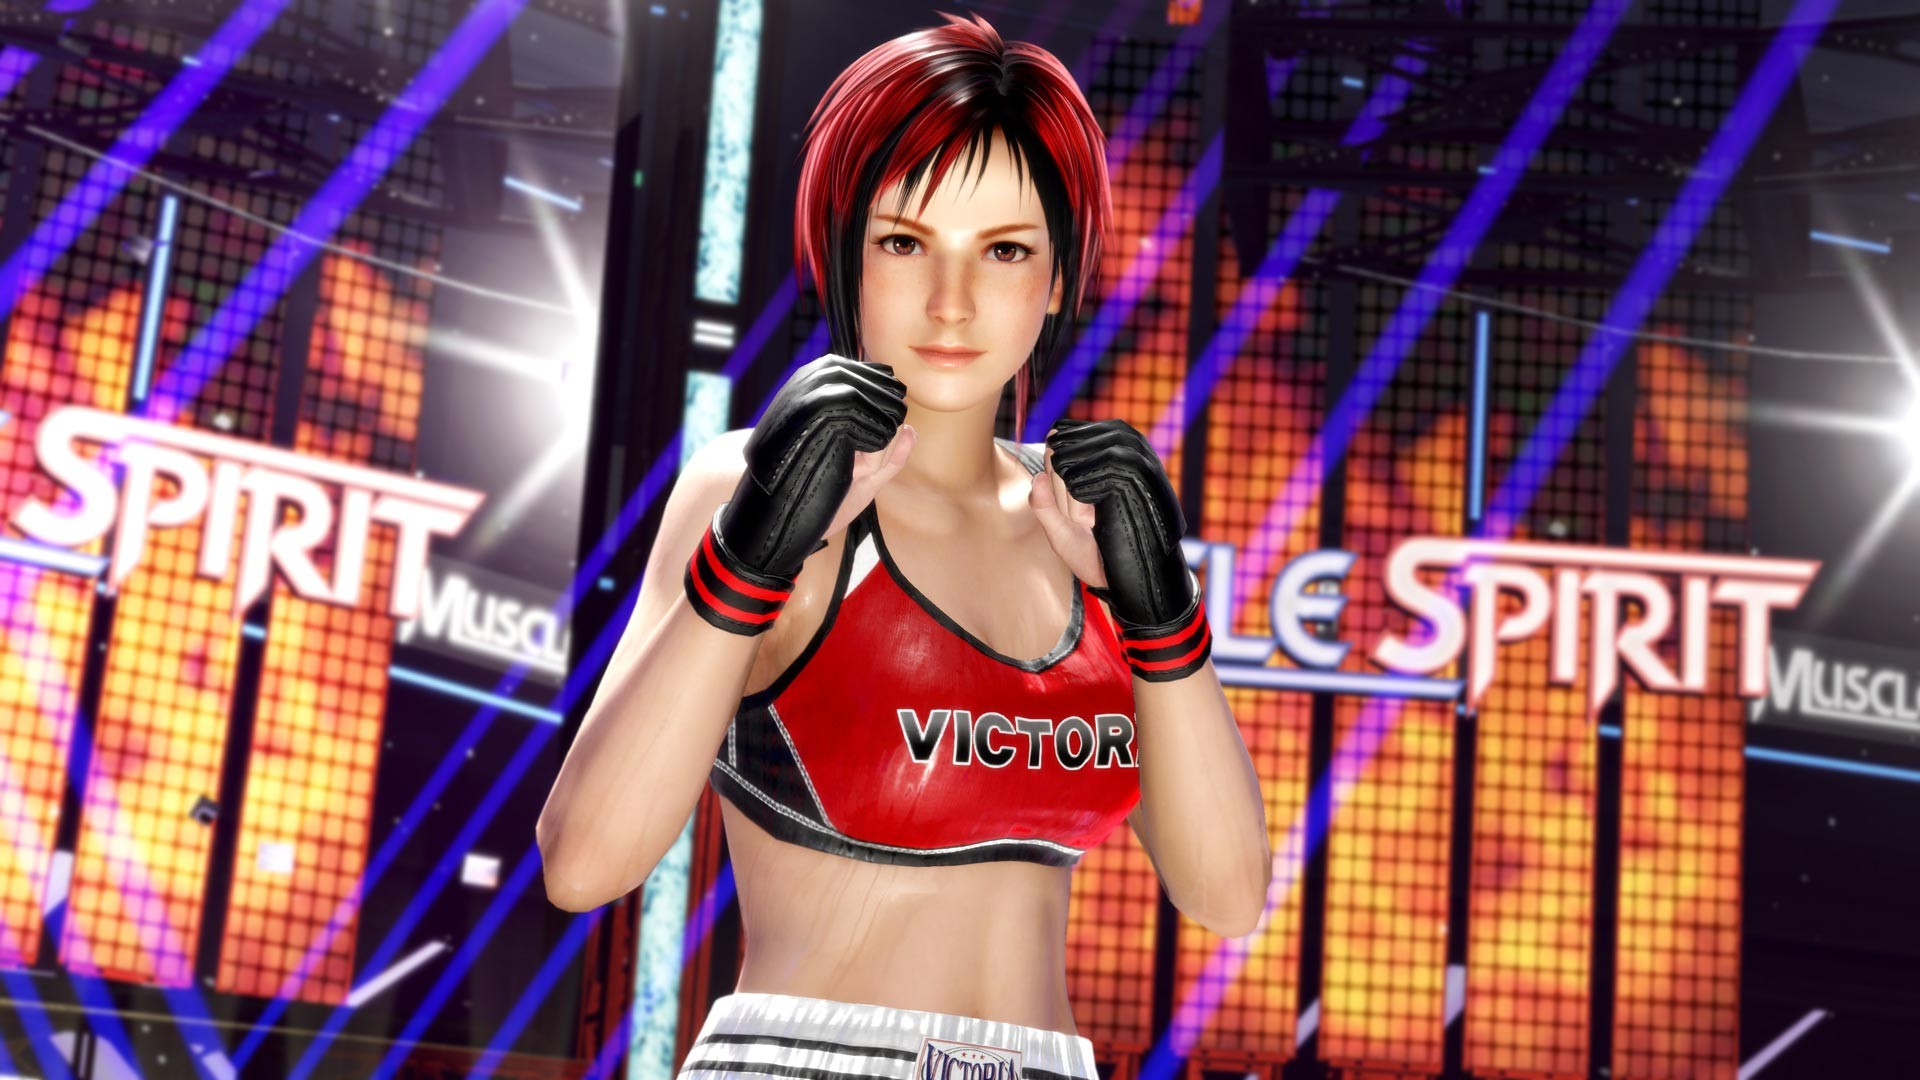 6Dead or Alive 6v1.03a޸CHEATHAPPENS